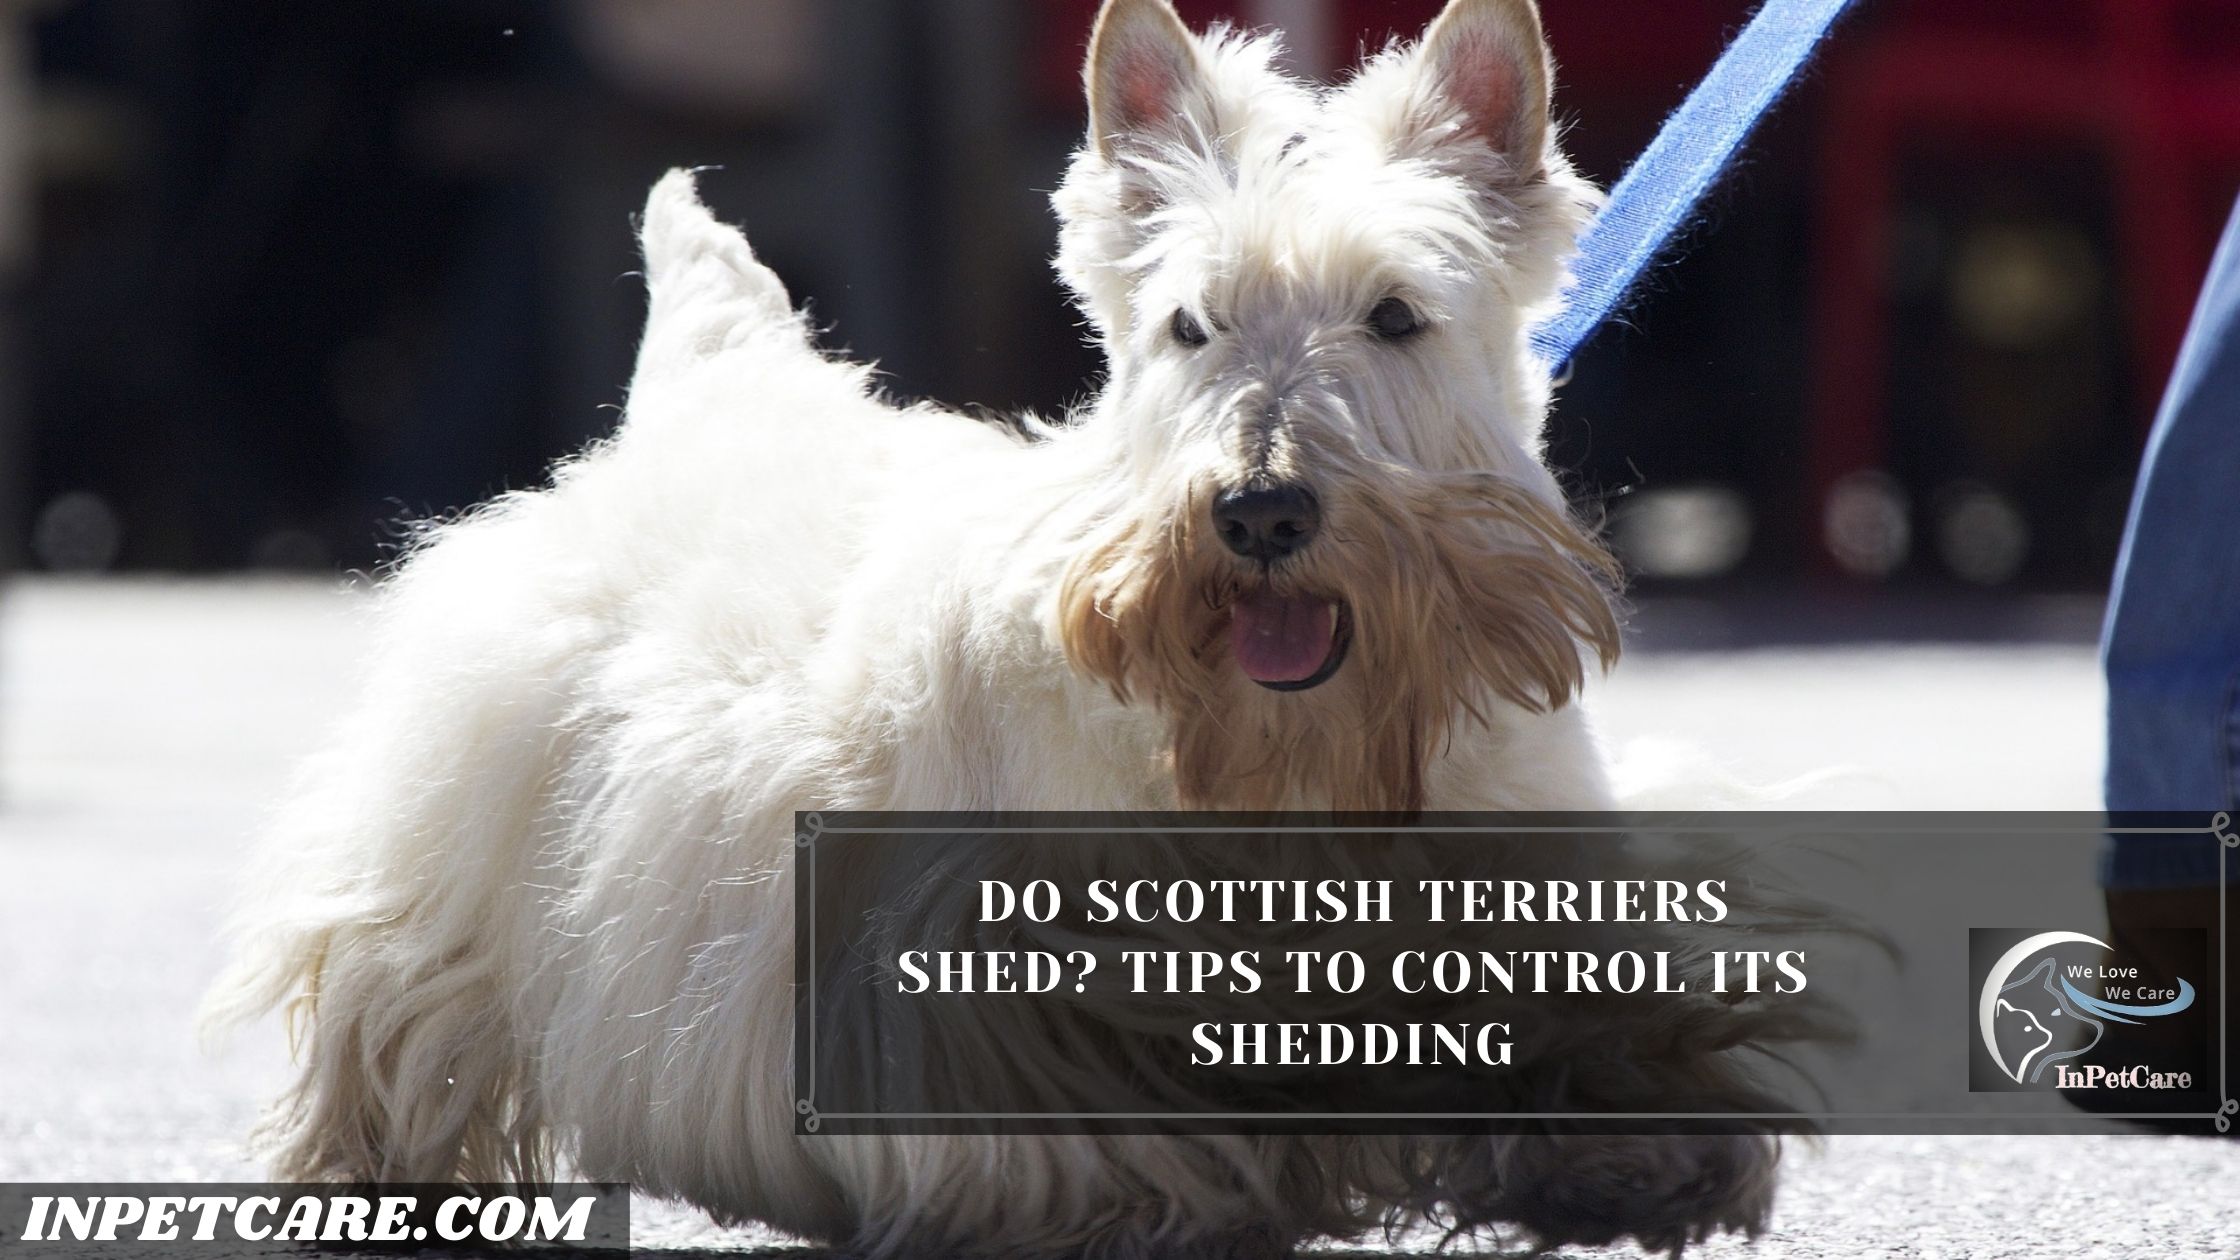 Do Scottish Terriers Shed?